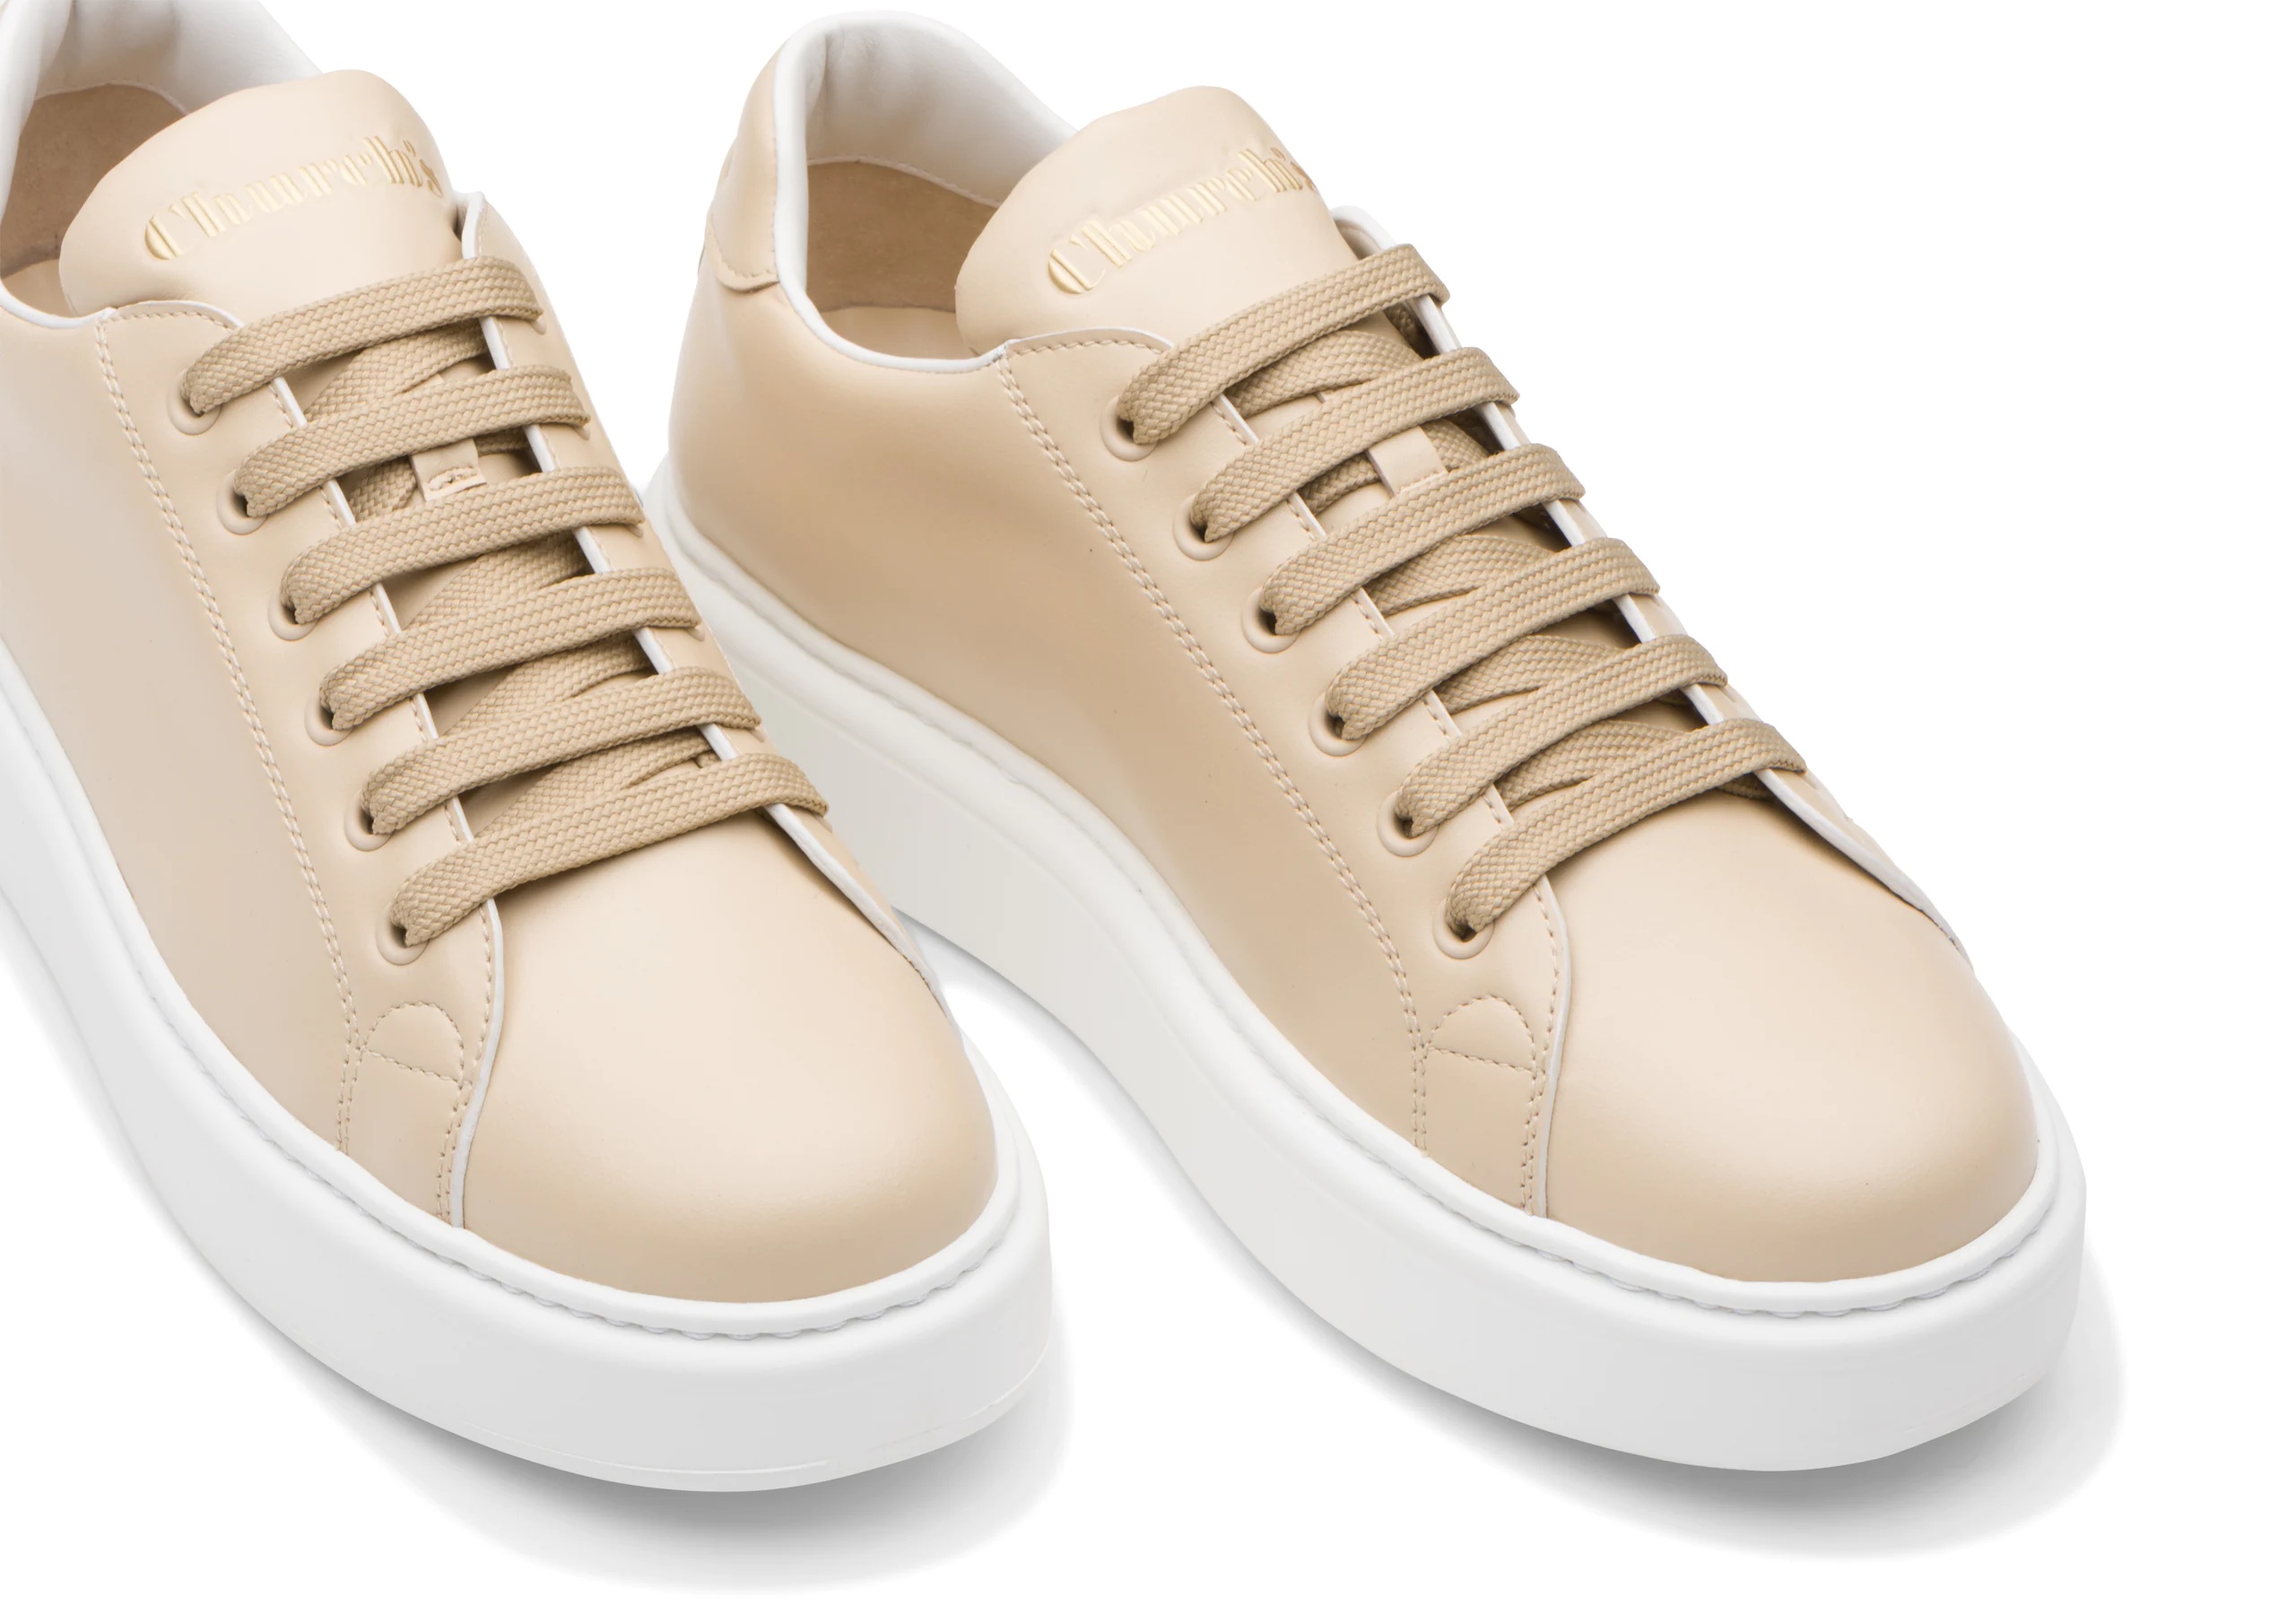 Mach 1
Calf Leather Classic Sneaker Soft pink/white - 4